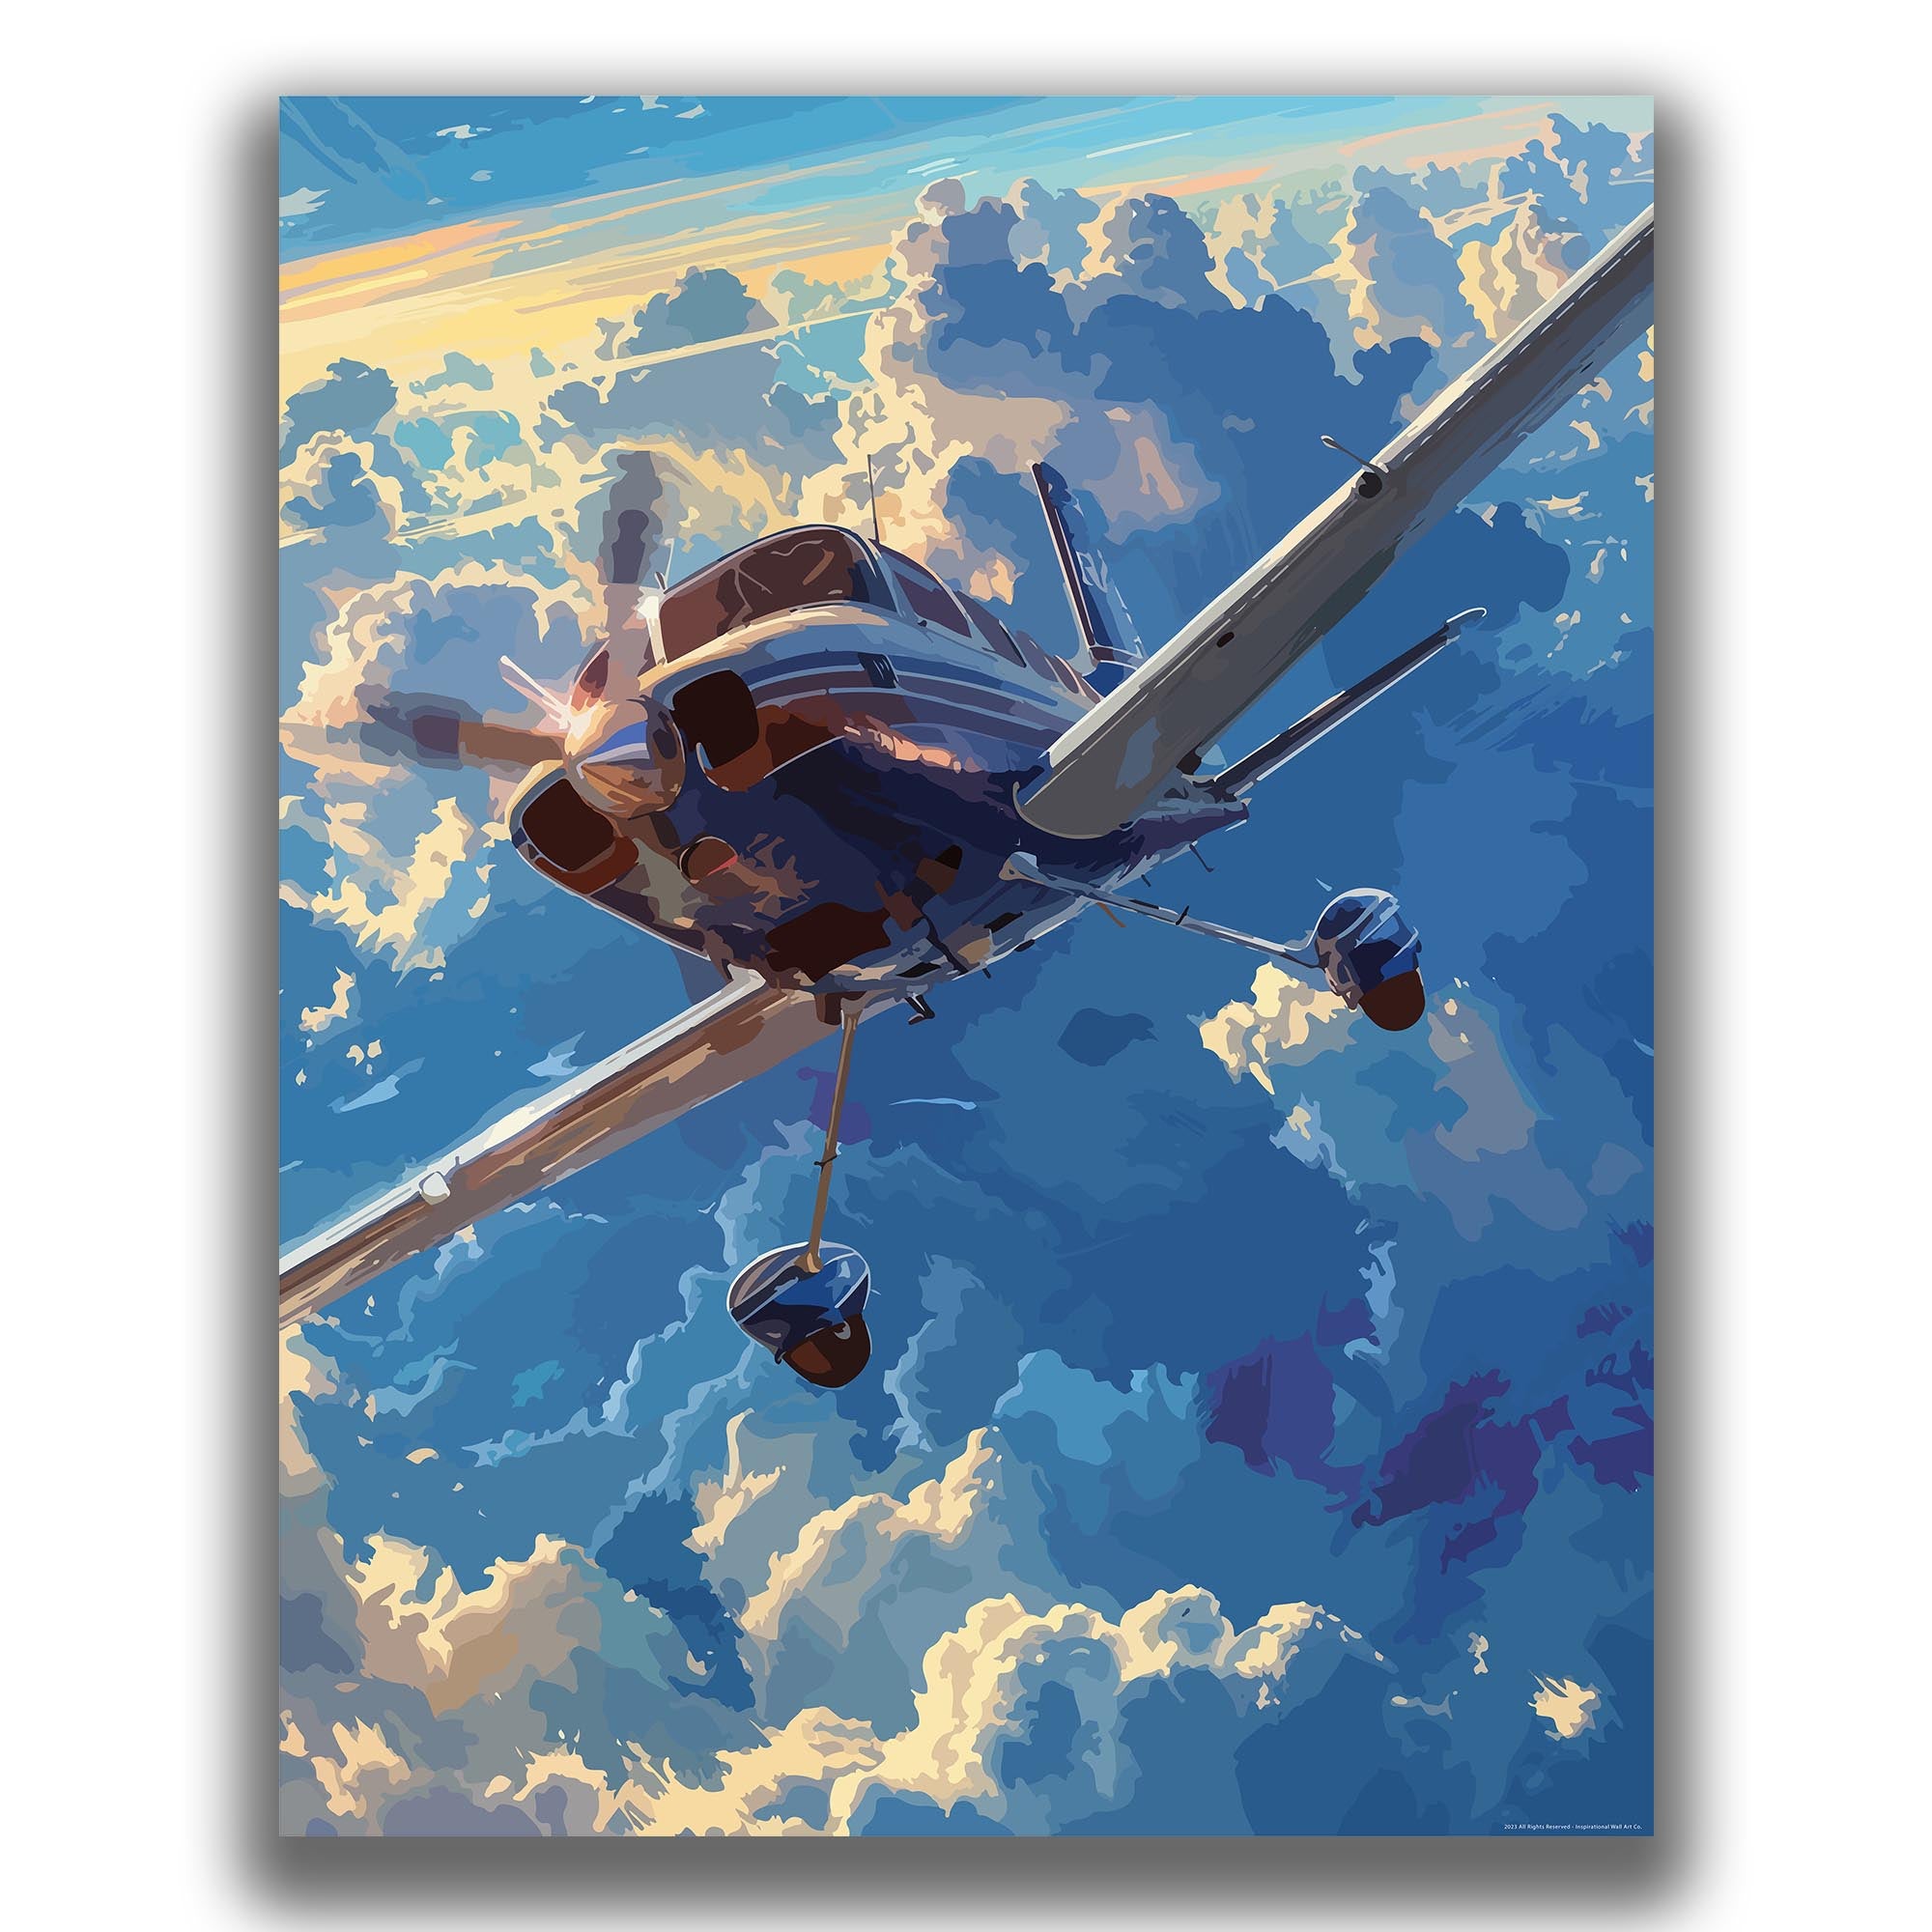 Charismatic - Airplane Poster